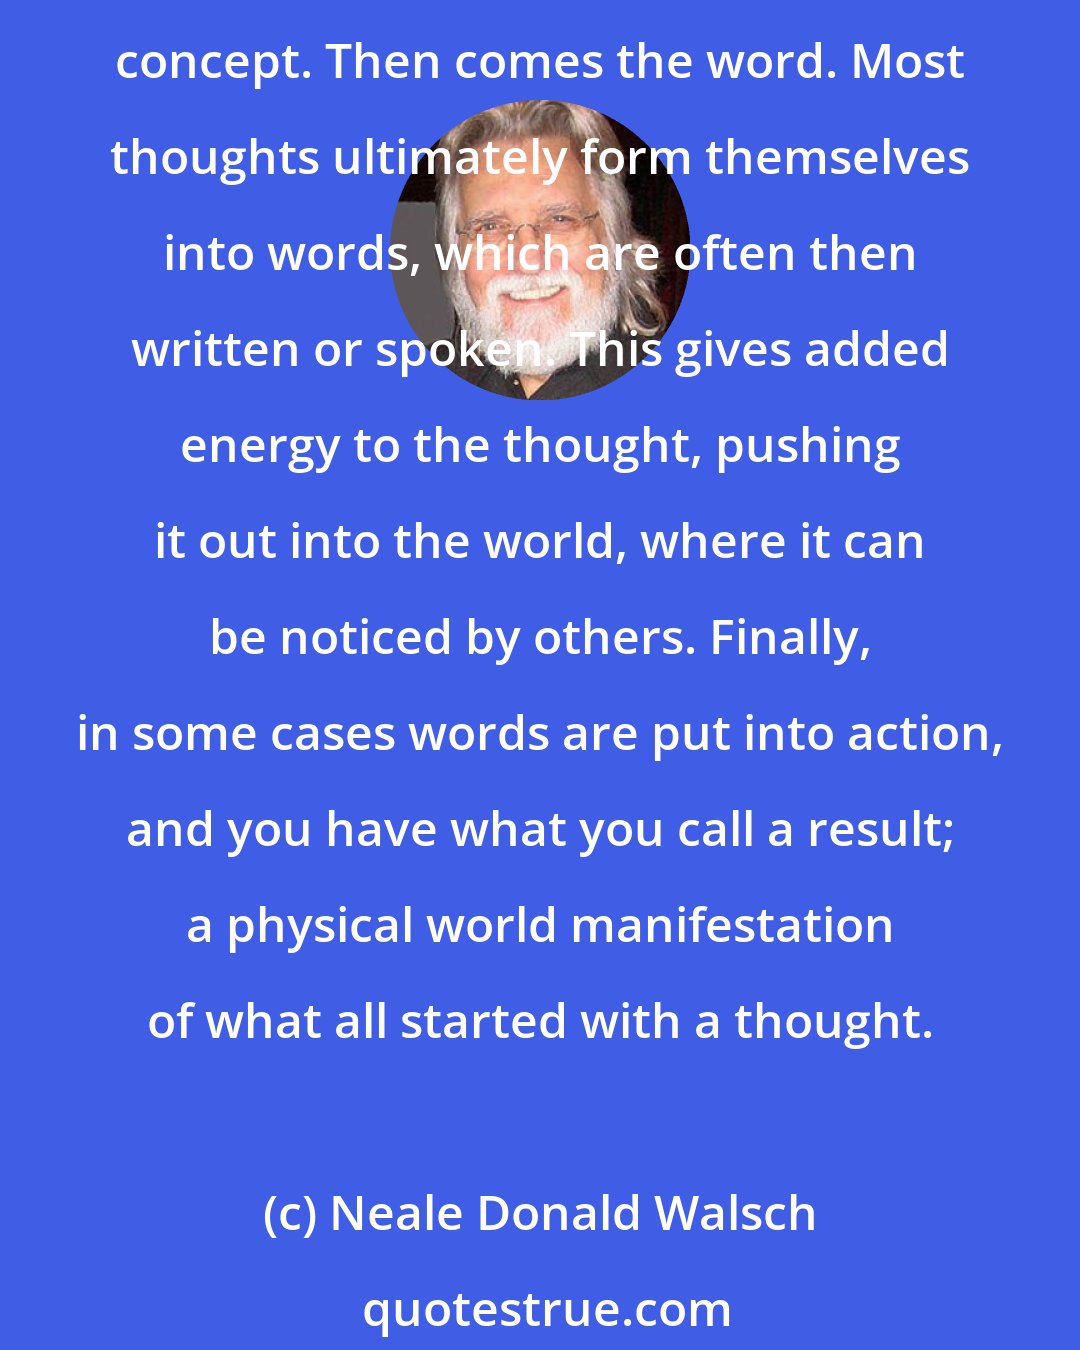 Neale Donald Walsch: The usual method of creation for most human beings is a three-step process involving thought, word, and deed or action. First comes thought; the formative idea; the initial concept. Then comes the word. Most thoughts ultimately form themselves into words, which are often then written or spoken. This gives added energy to the thought, pushing it out into the world, where it can be noticed by others. Finally, in some cases words are put into action, and you have what you call a result; a physical world manifestation of what all started with a thought.